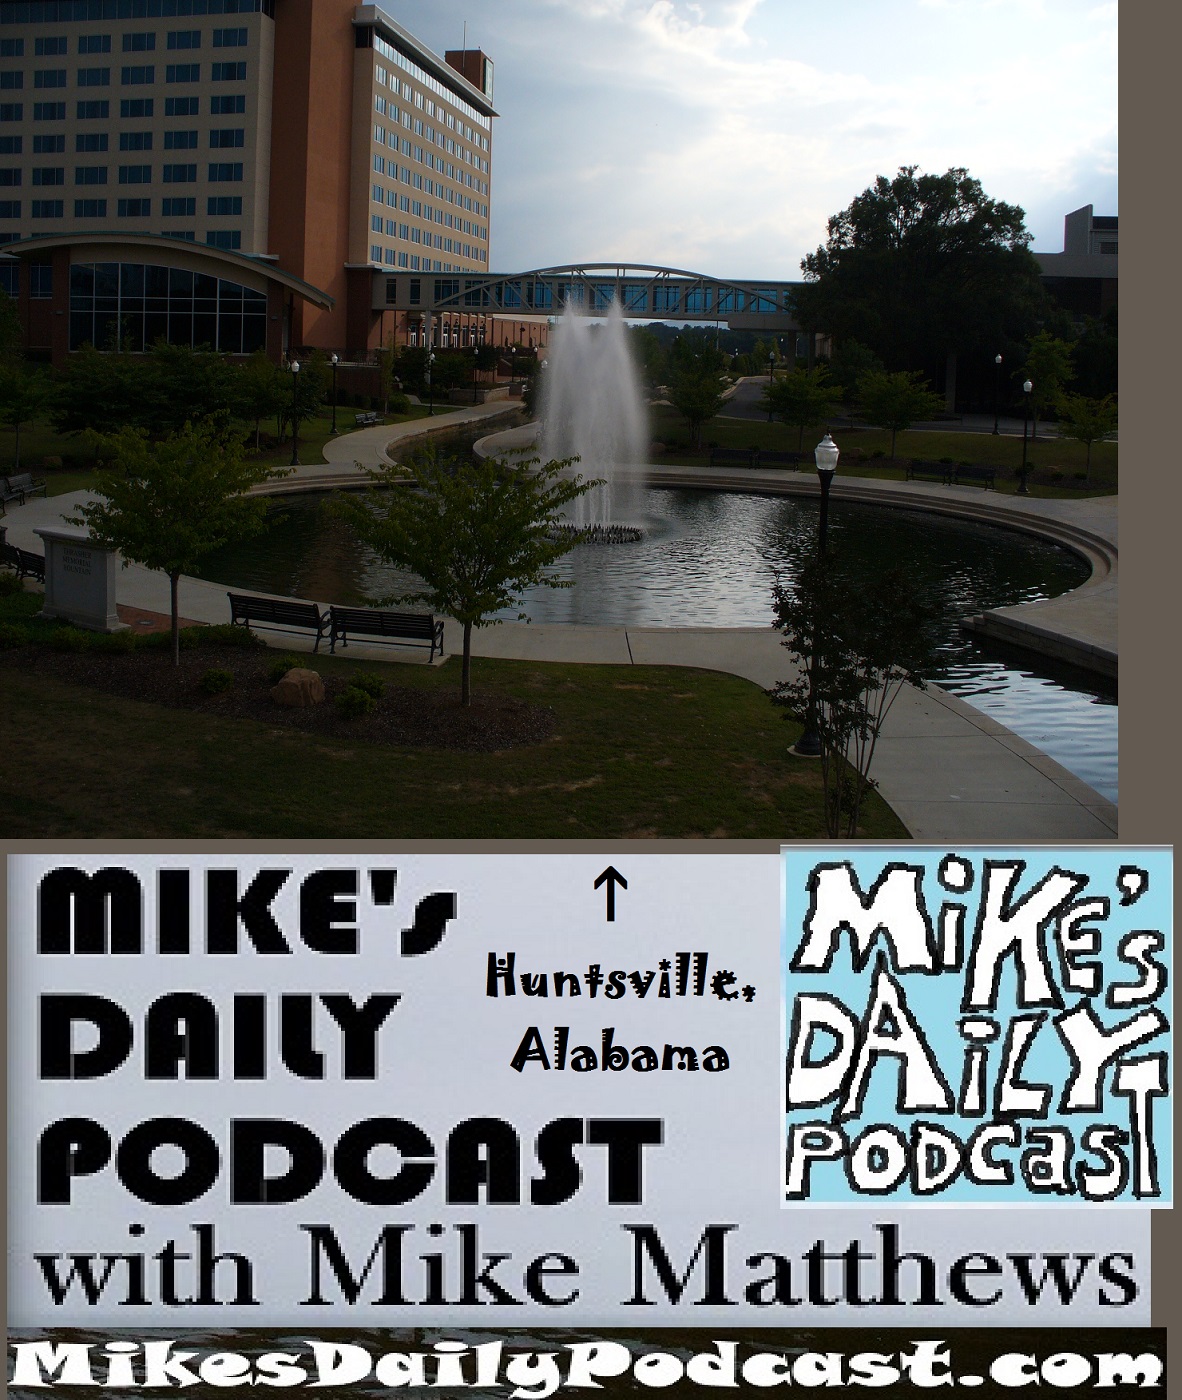 MIKEs DAILY PODCAST 1097 Huntsville Alabama